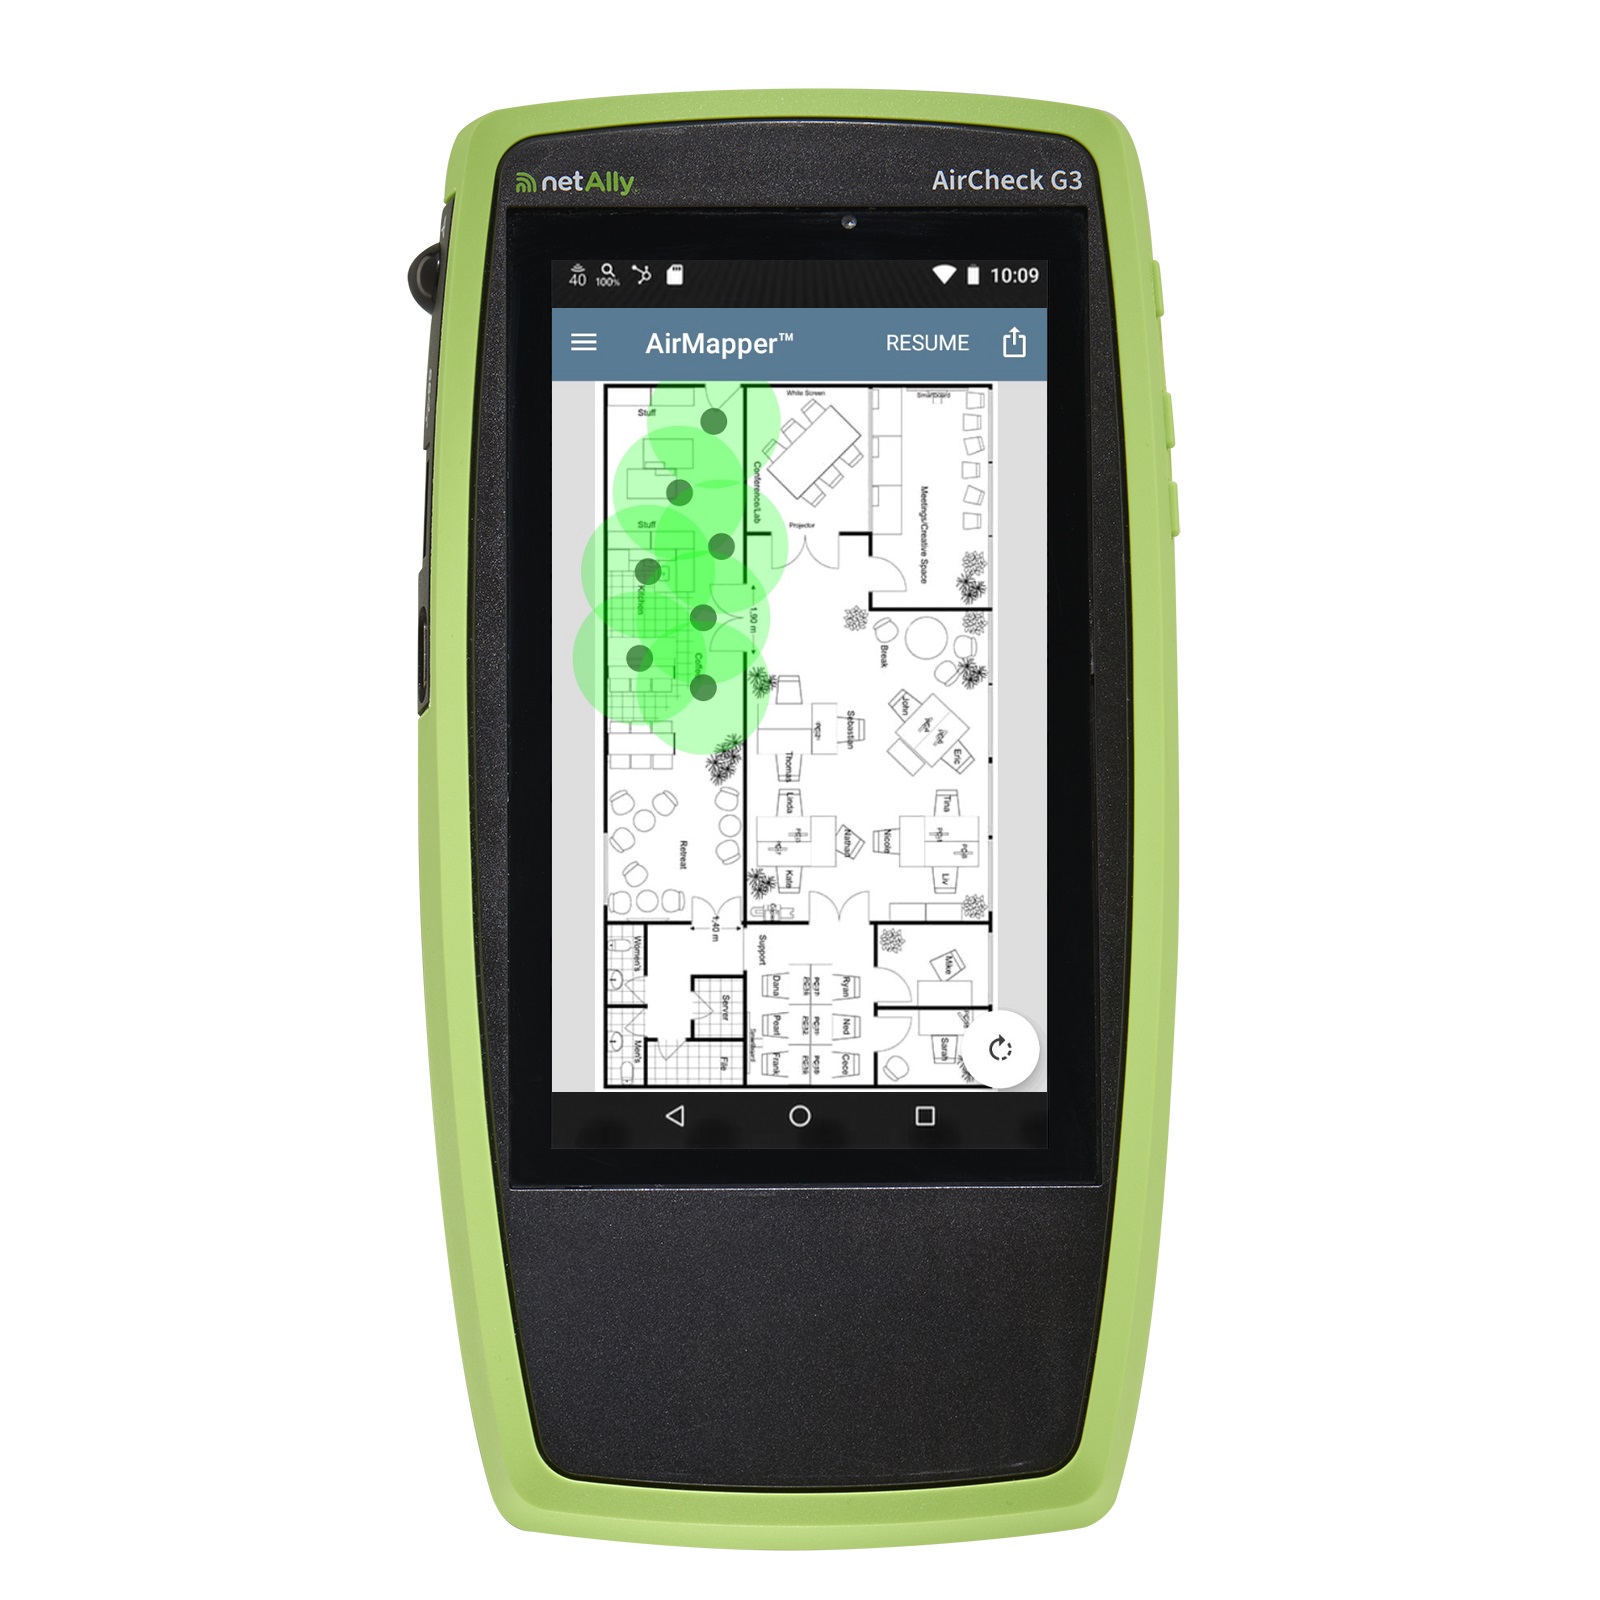 NetAlly AirCheck G3 with AirMapper screen image